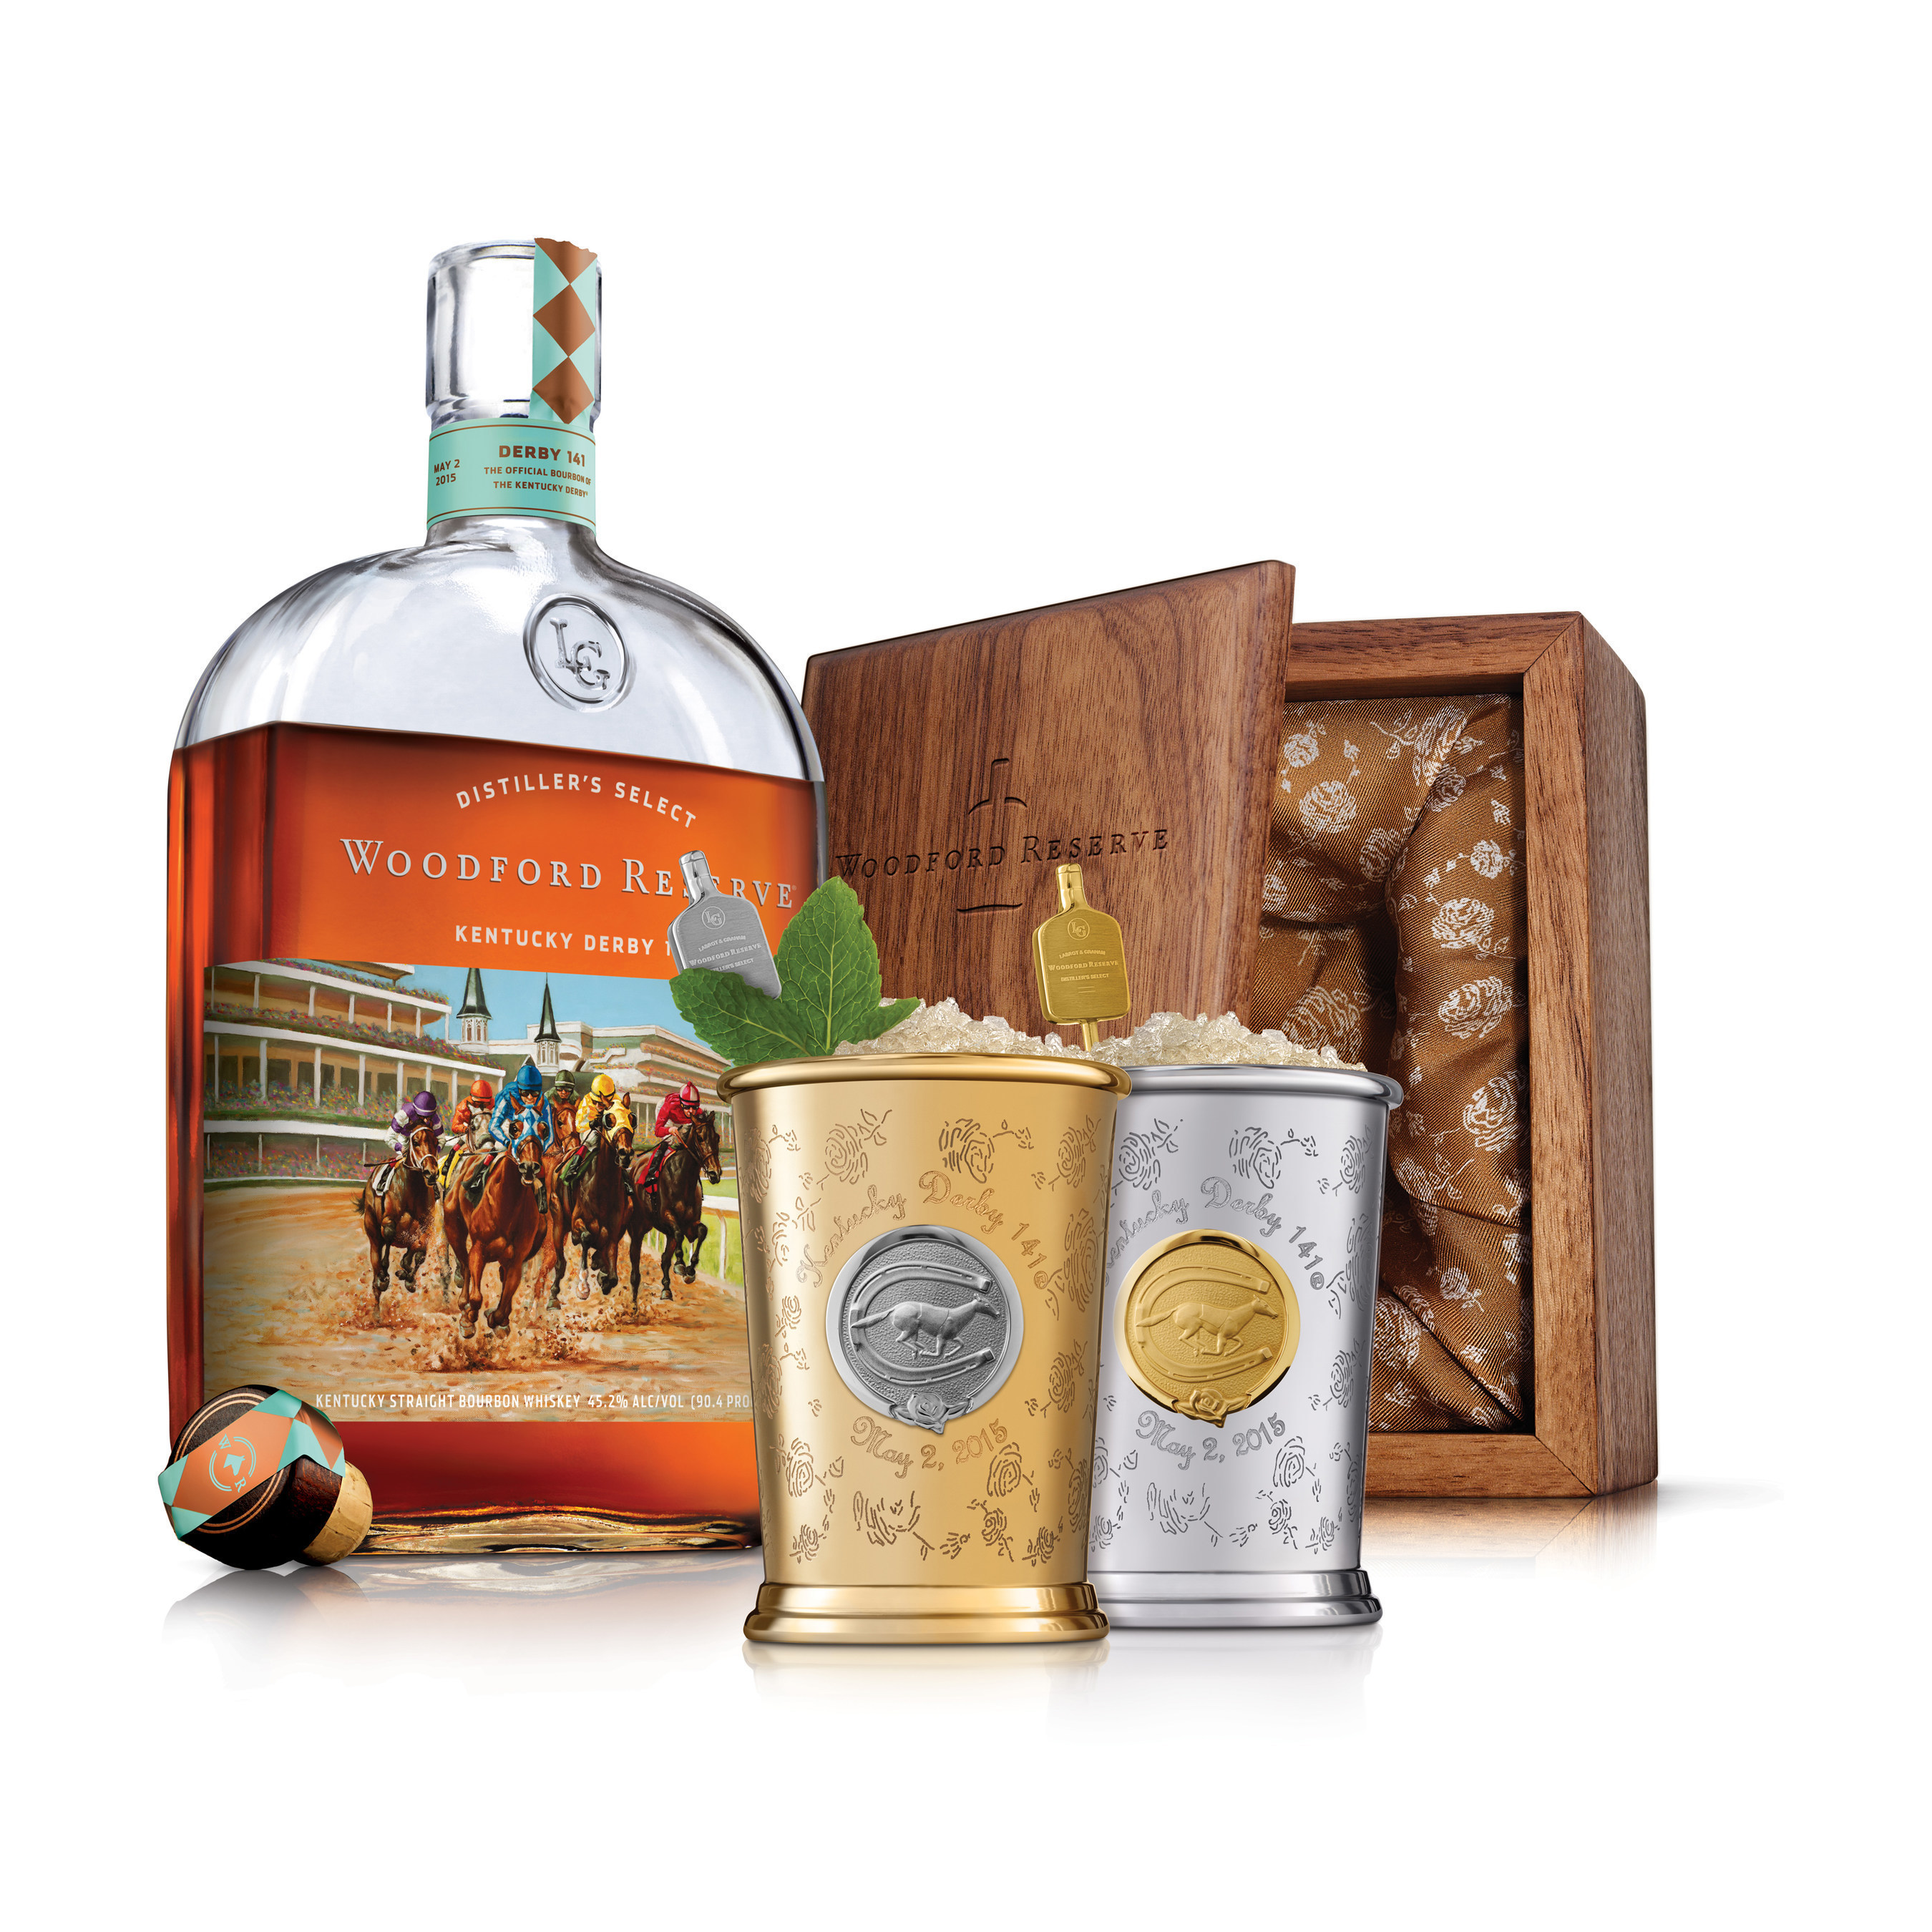 Woodford Reserve Teams Up with Fashion & Mixology's Most Notable Names to Create $1,000 Kentucky Derby Mint Julep Cup.